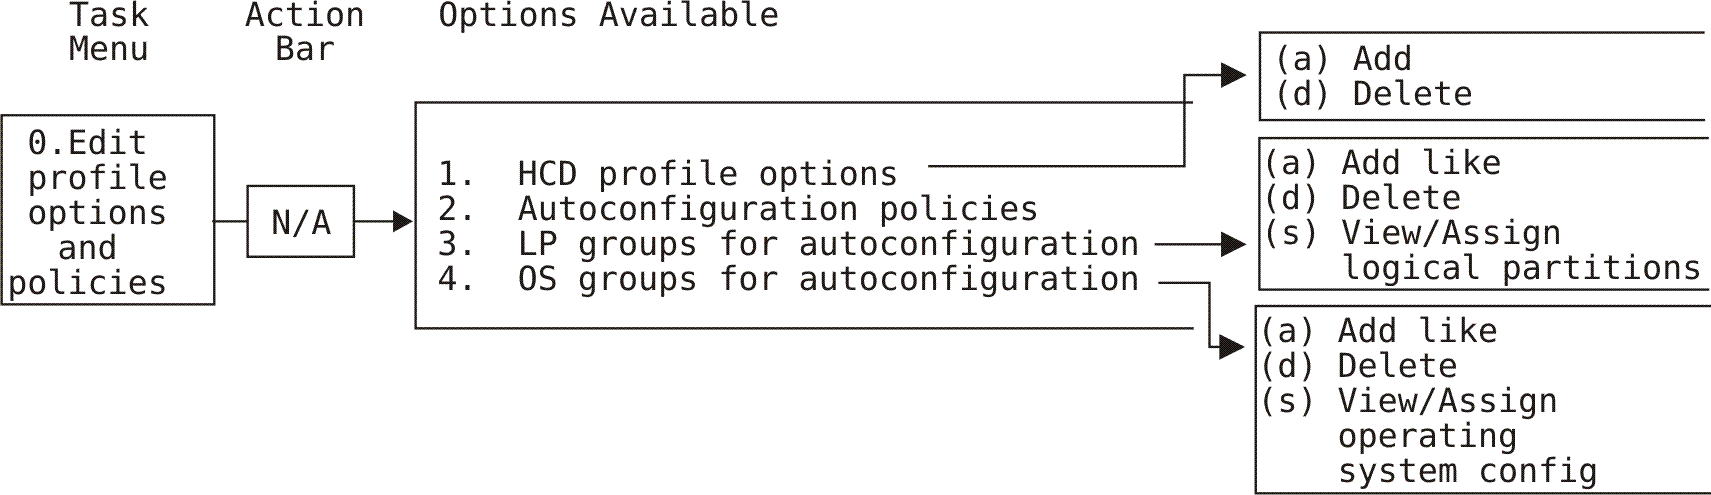 This graphic shows the navigation through the Edit profile options and policies: Option 0